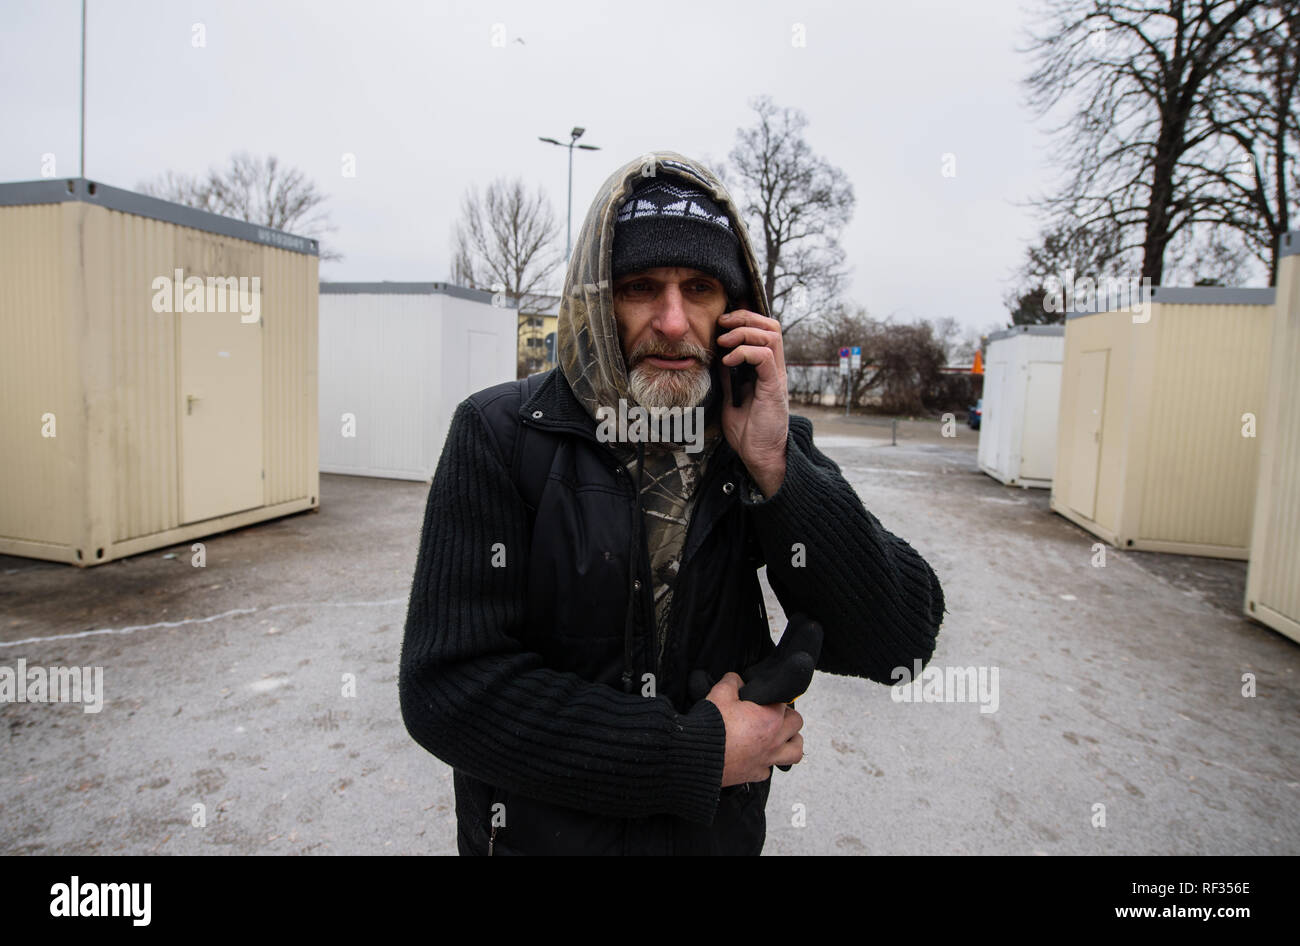 22 January 2019, Rhineland-Palatinate, Mainz: Günni (50) stands between the living containers and calls his daughter. The father of a daughter (29) spent 22 years in prison, according to his own statement. He's currently dry and off the drugs thanks to the substitute drug Subutex. He prefers to sleep on the street or in empty houses, in the official accommodations there is always trouble, fights, alcohol problems and thefts. Over the winter, the city of Mainz has set up residential containers for the homeless at Fort Hauptstein near the main railway station. The Evangelische Wohnungslosenhilfe Stock Photo